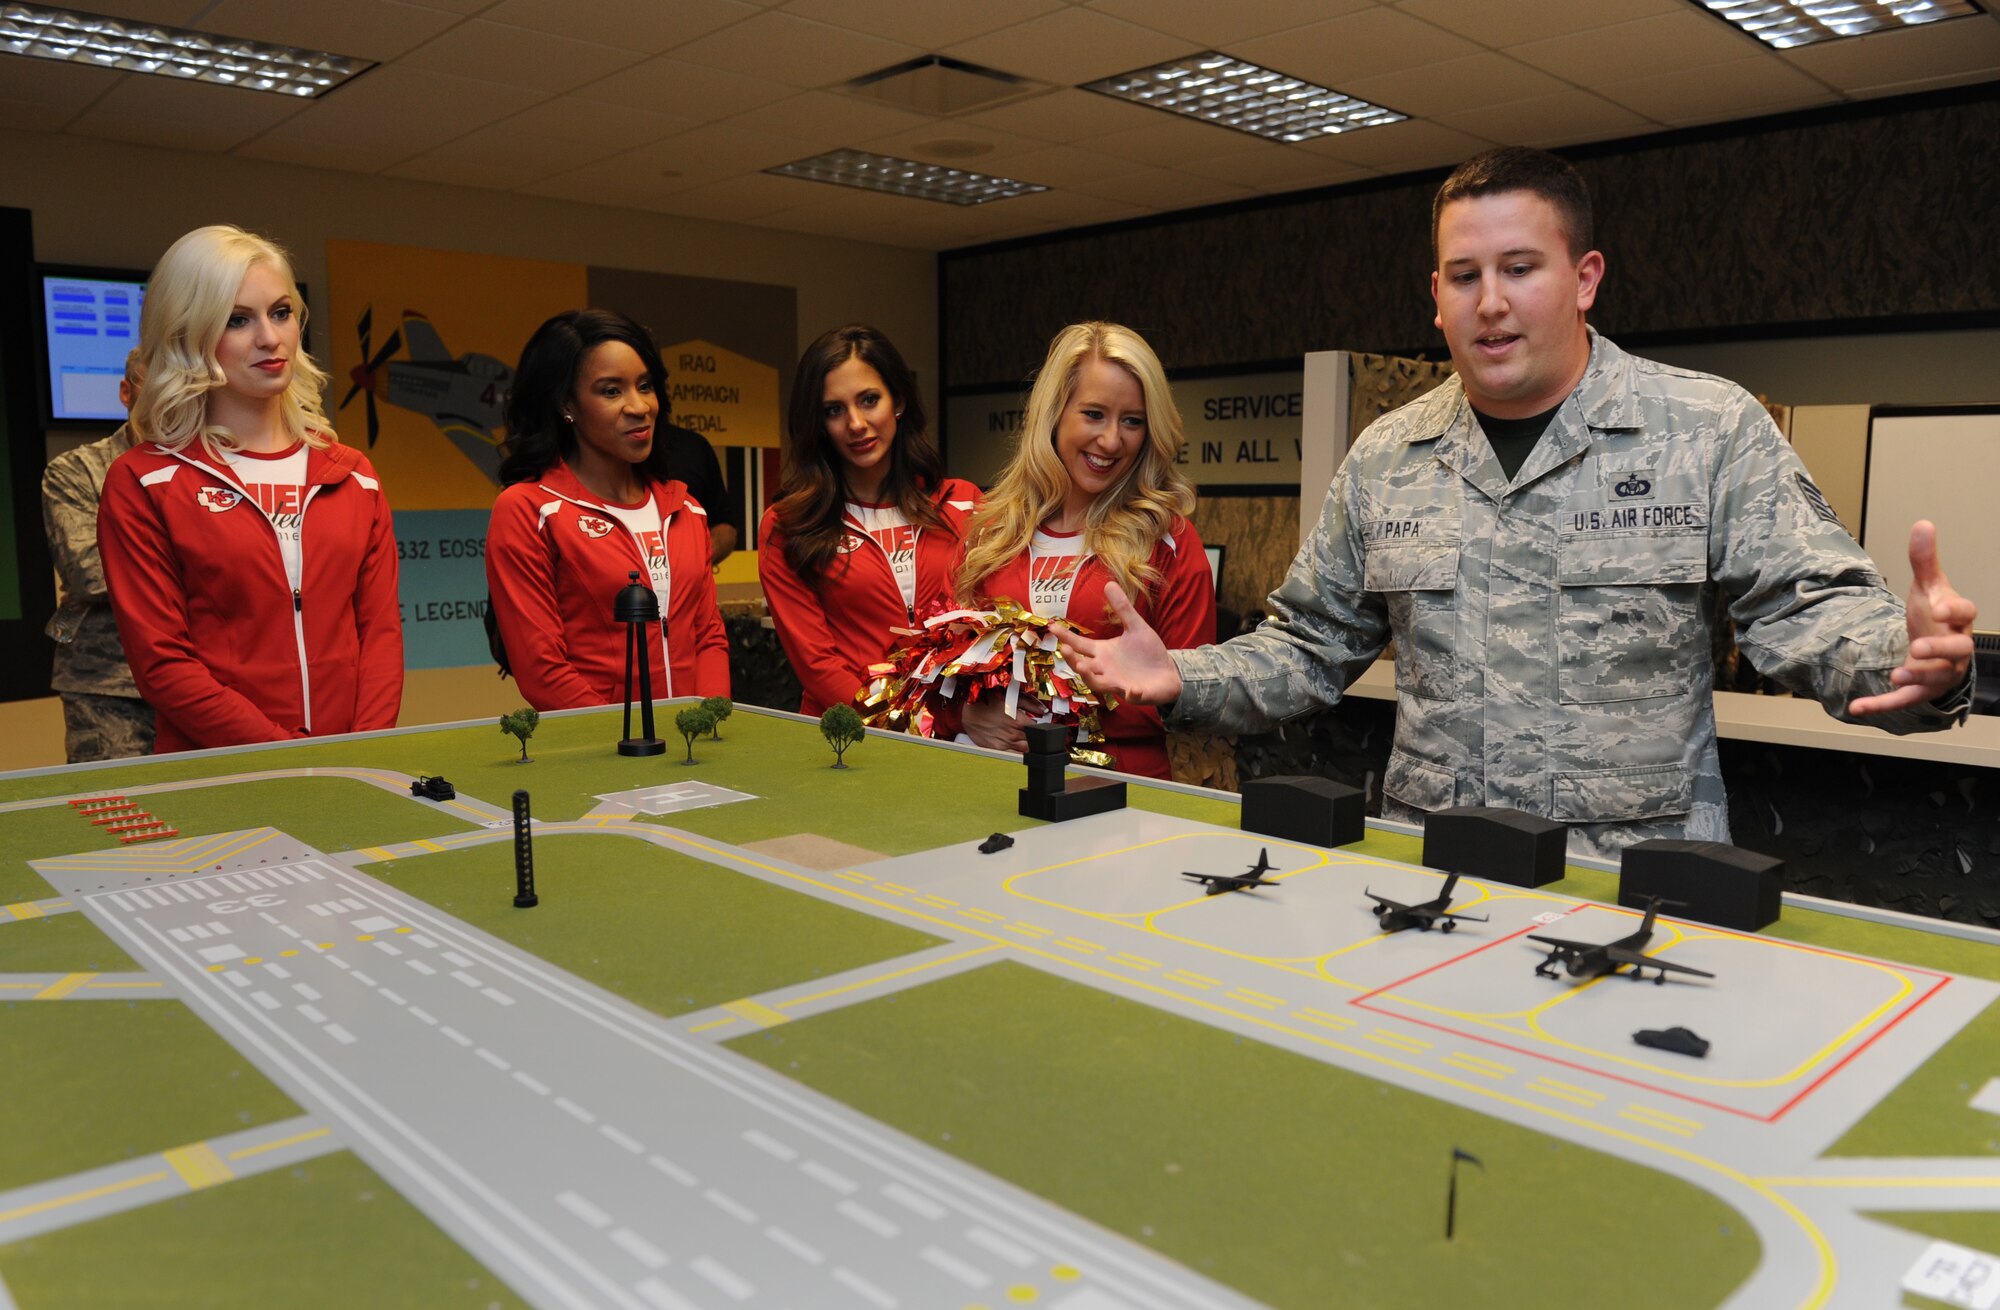 Tech. Sgt. Korey Papa, 334th Training Squadron instructor, shows an airfield model to Kansas City Chiefs cheerleaders during a tour at Cody Hall Sept. 30, 2016, on Keesler Air Force Base, Miss. The NFL cheerleaders visited Keesler to learn about the mission, hold a cheer clinic at the youth center and participate in a fashion show at the base exchange. (U.S. Air Force photo by Kemberly Groue/Released)